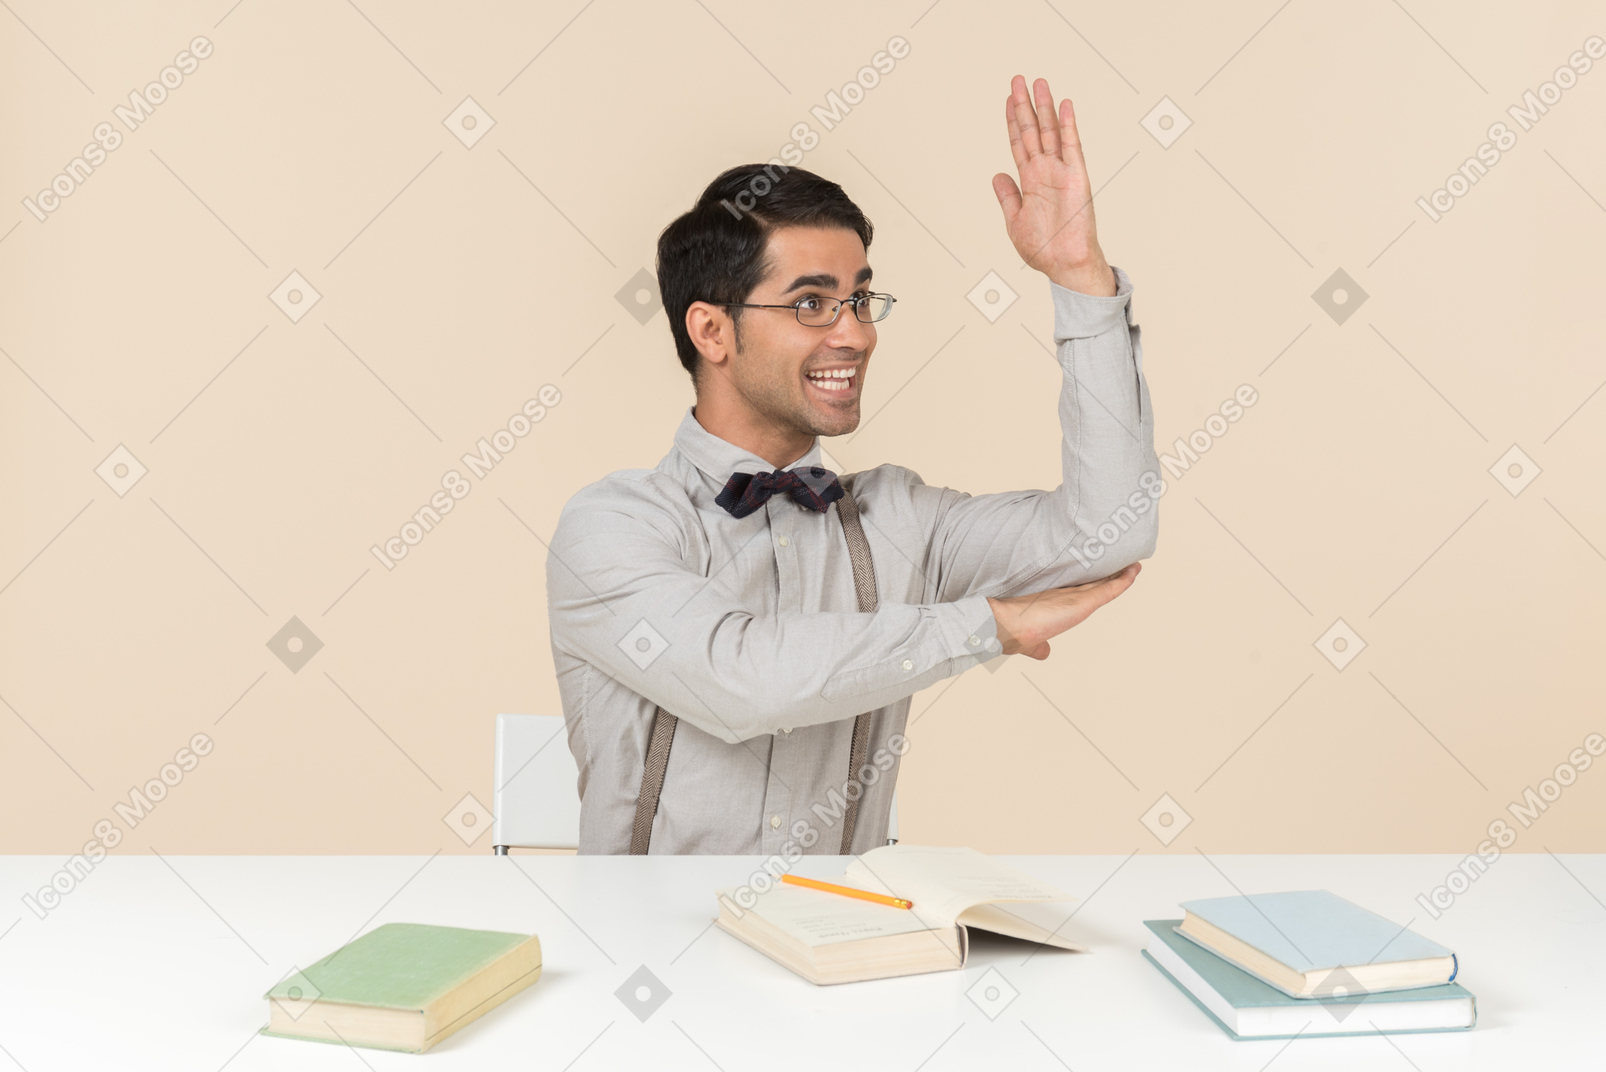 Adult student sitting at the table and raising a hand